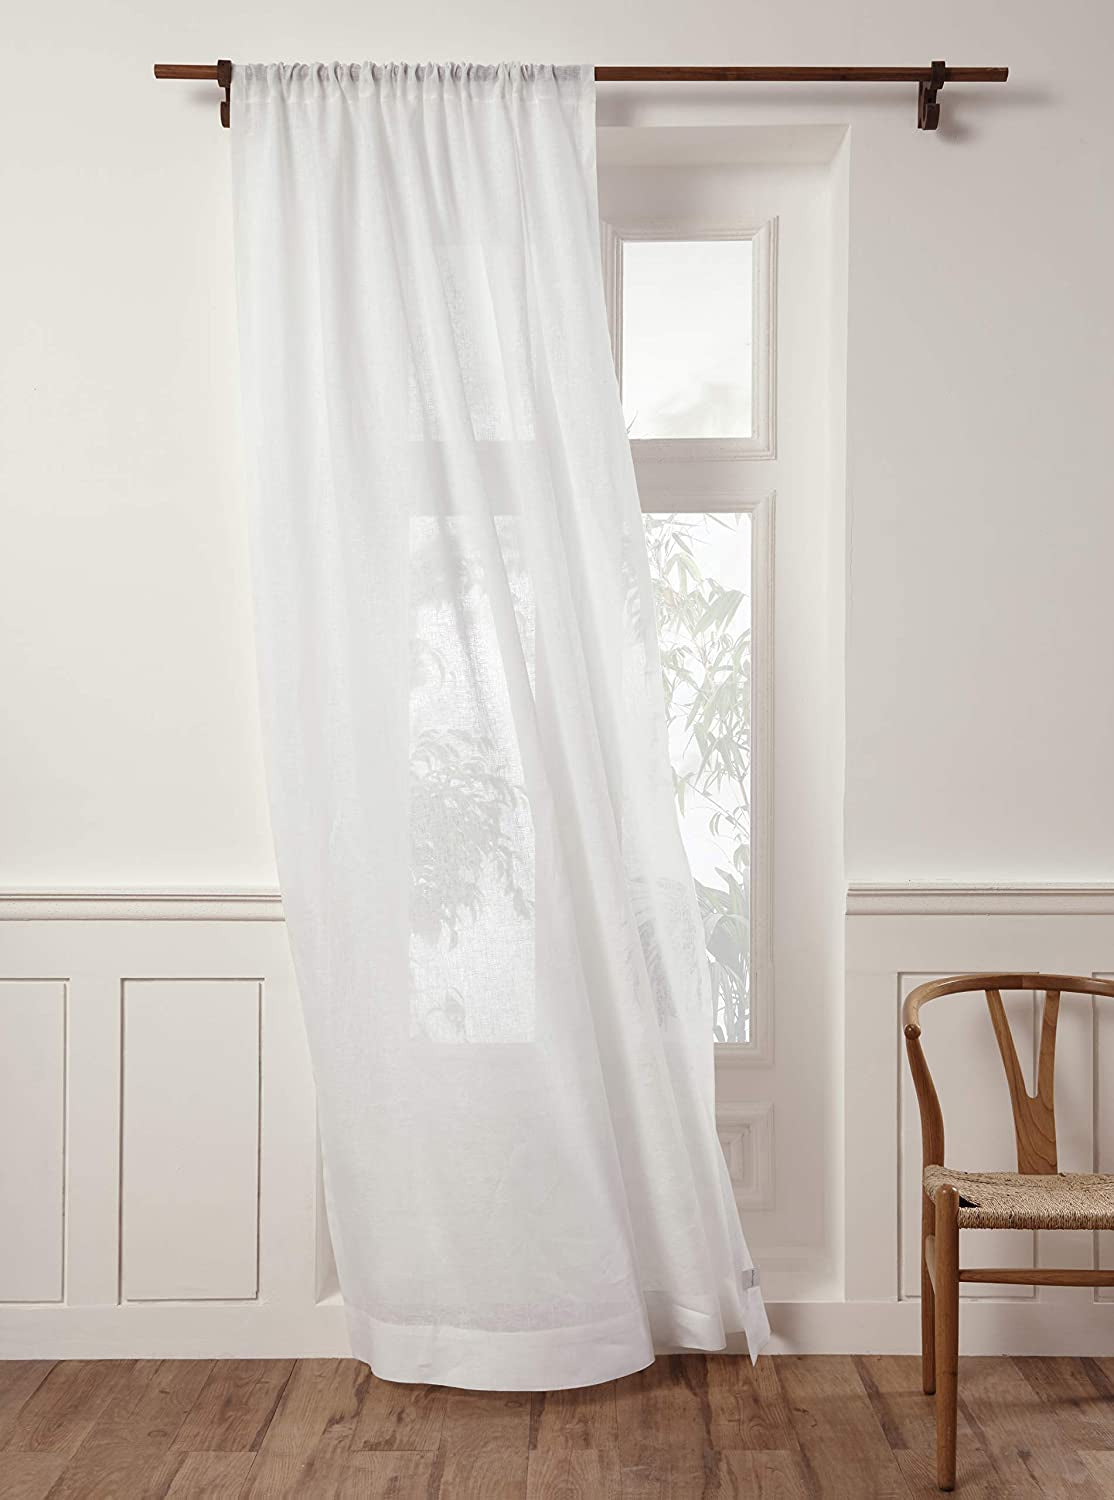 Solino Home Linen Sheer Curtain – 52 X 45 Inch Light Natural Rod Pocket Window Panel – 100% Pure Natural Fabric Curtain for Living Room, Indoor, Outdoor – Handcrafted from European Flax  Solino Home White 52 X 63 Inch 